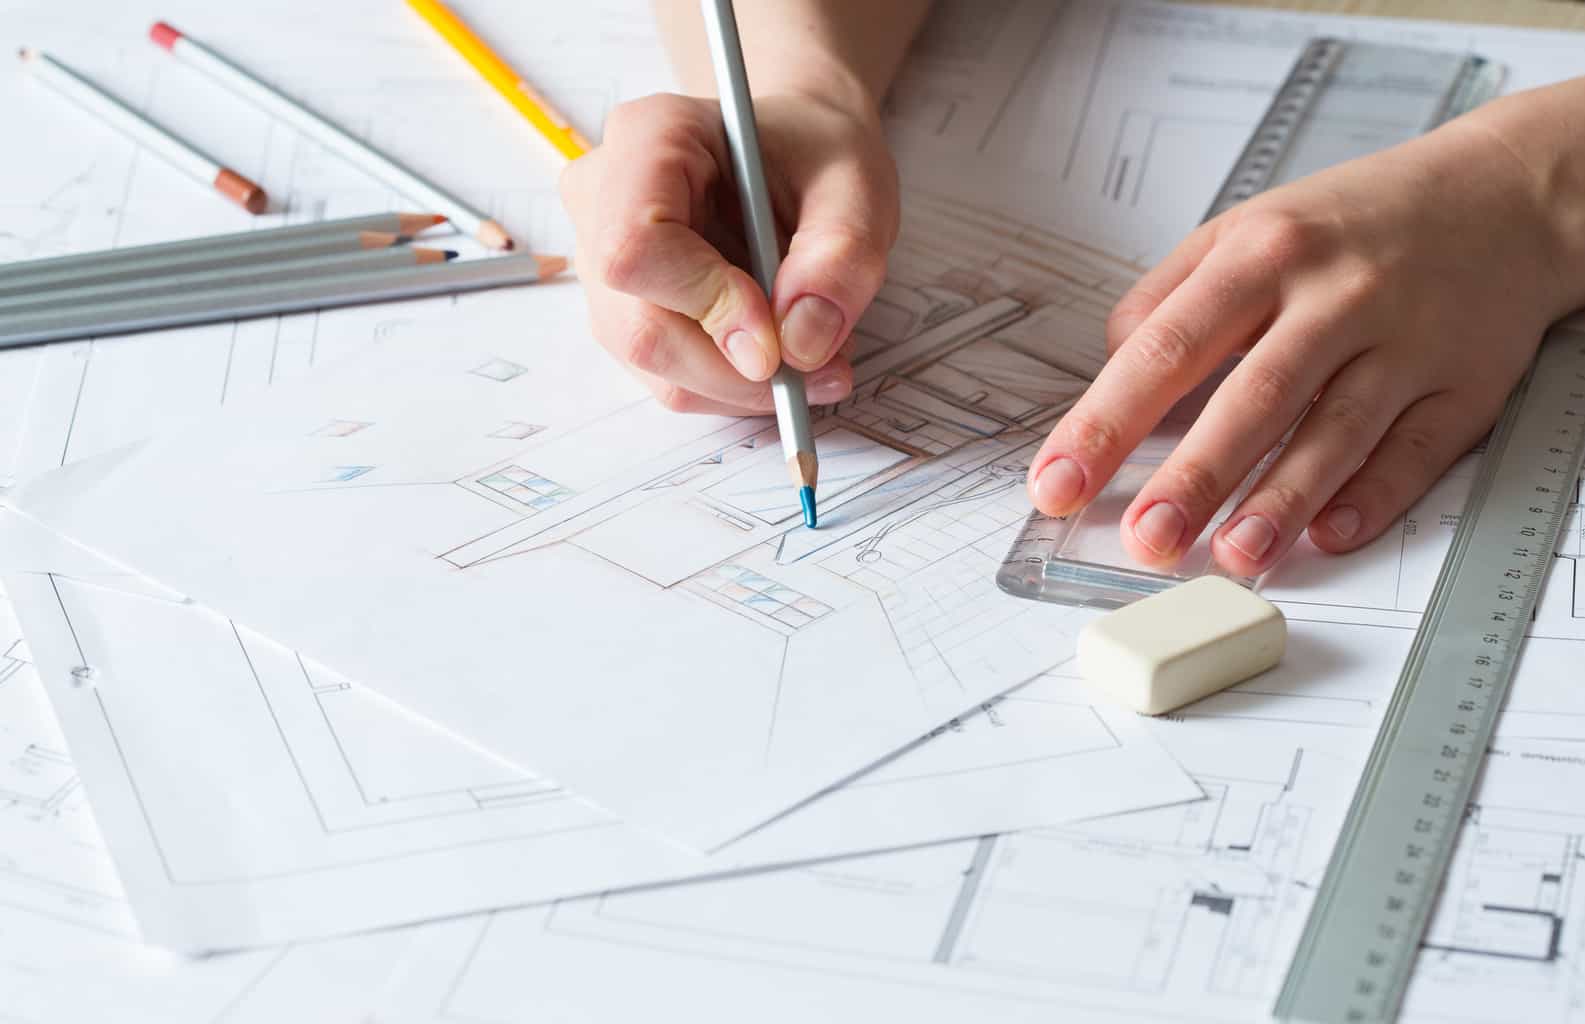 Can You Design a Home Without Being an Architect?